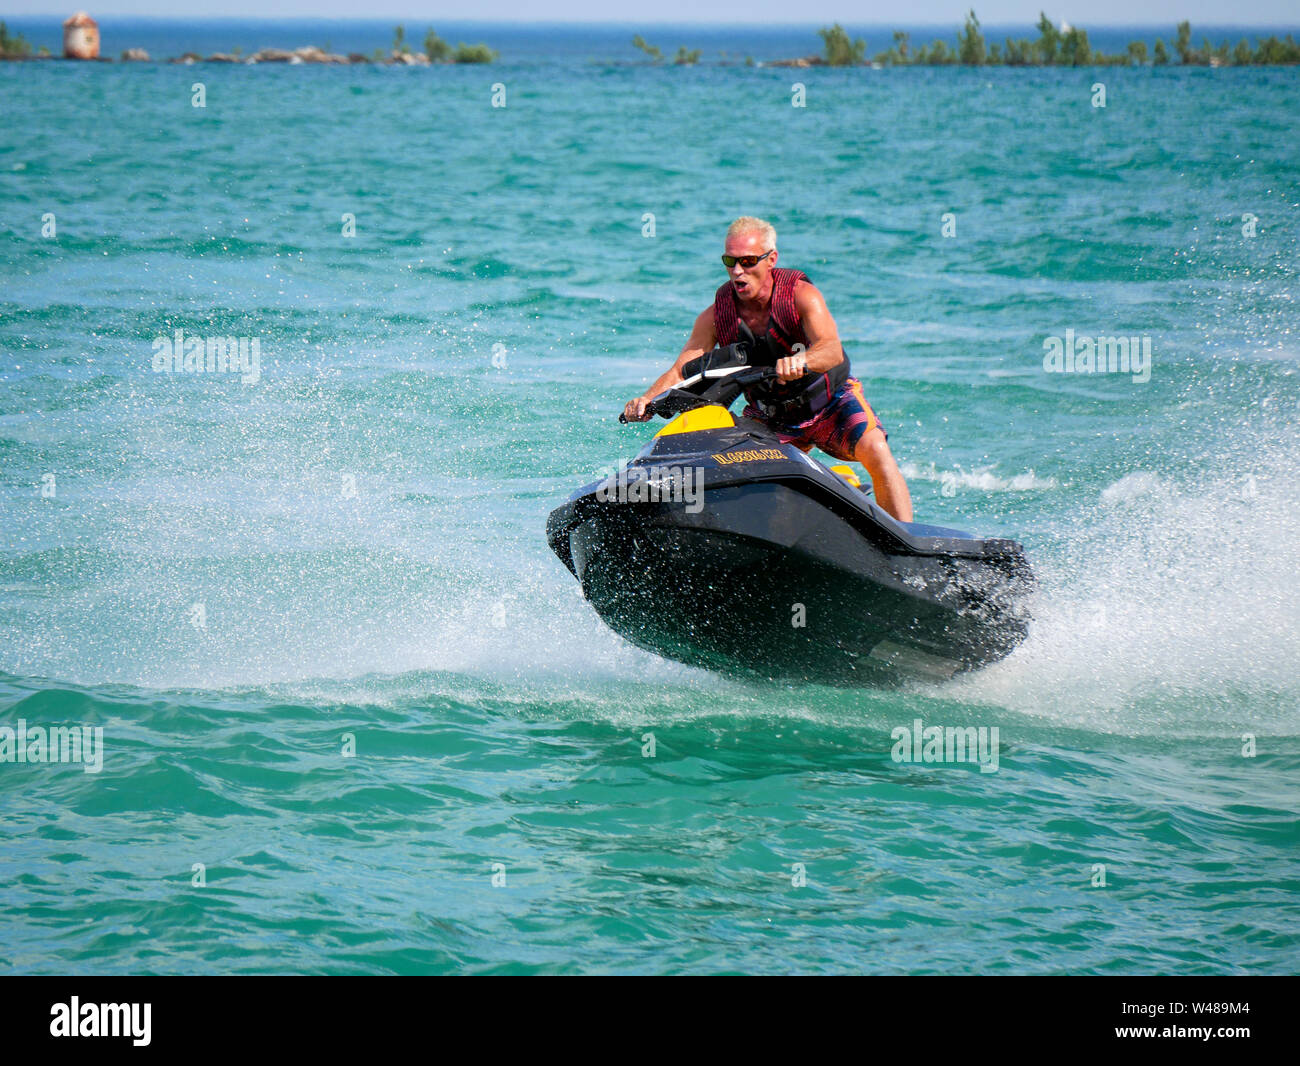 Man riding personal watercraft view from Navy Pier, Chicago, Illinois. Stock Photo